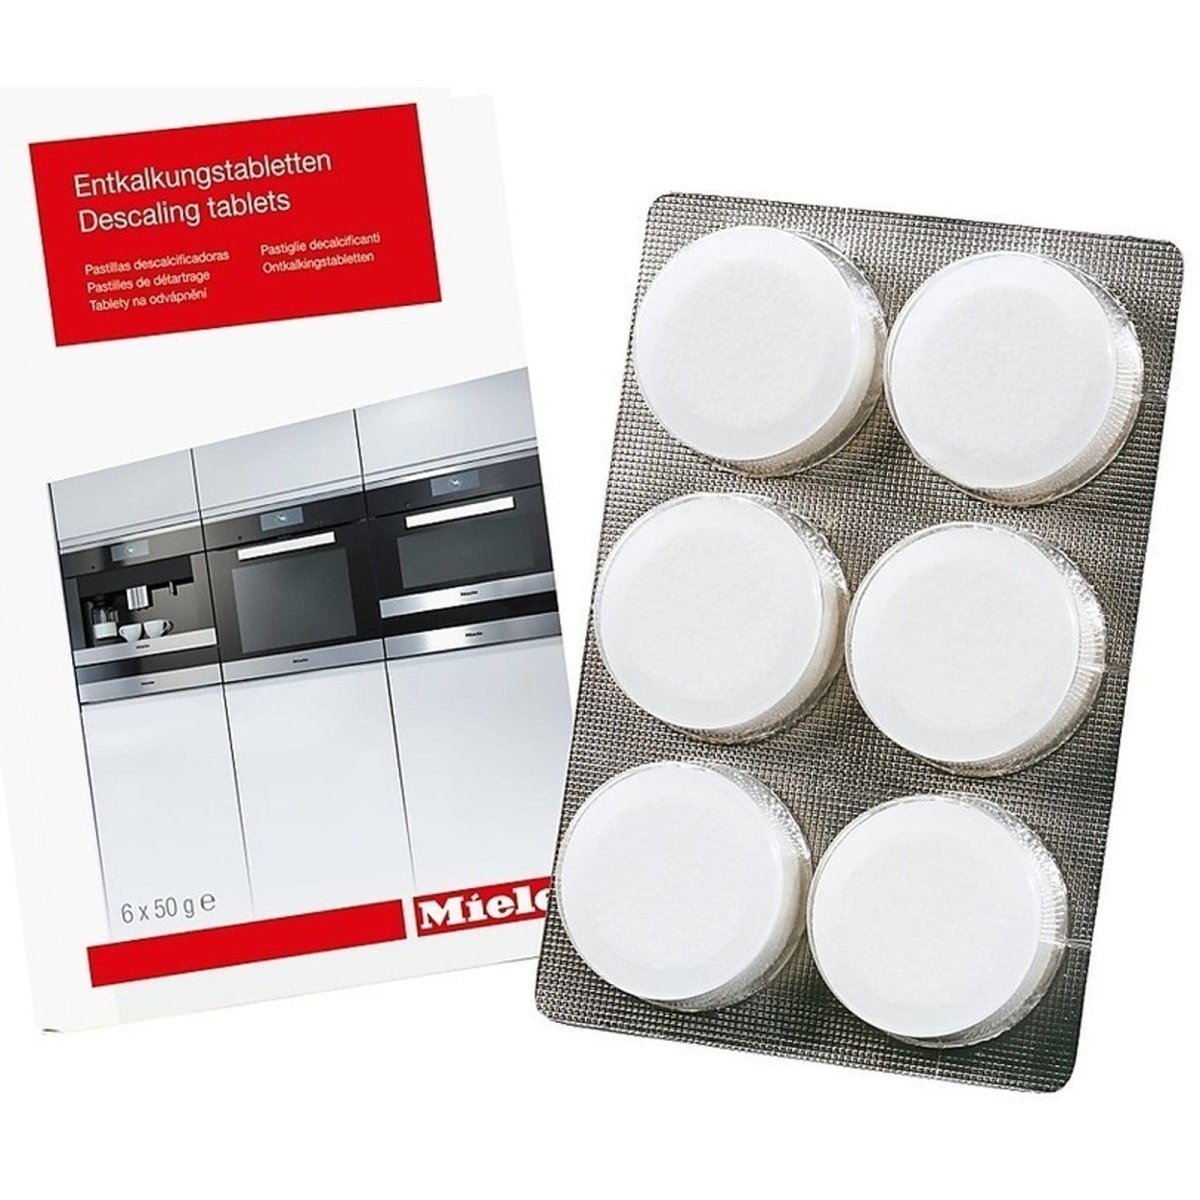 Miele 10178330 Descaling Tablets For Ovens, Coffee Machines & Irons (Pack of 6) | Atlantic Electrics